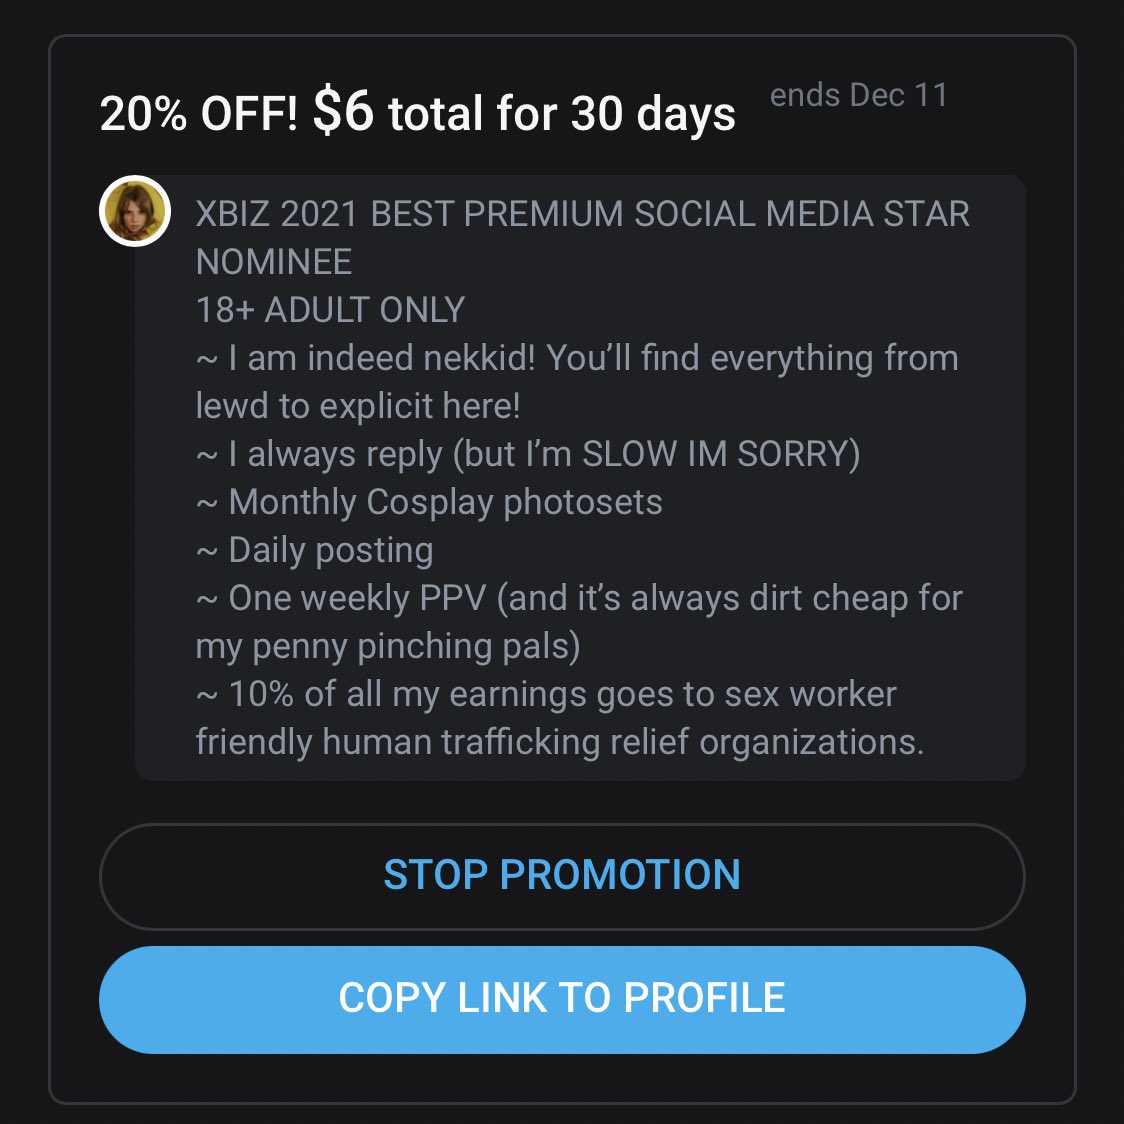 Onlyfans price list example